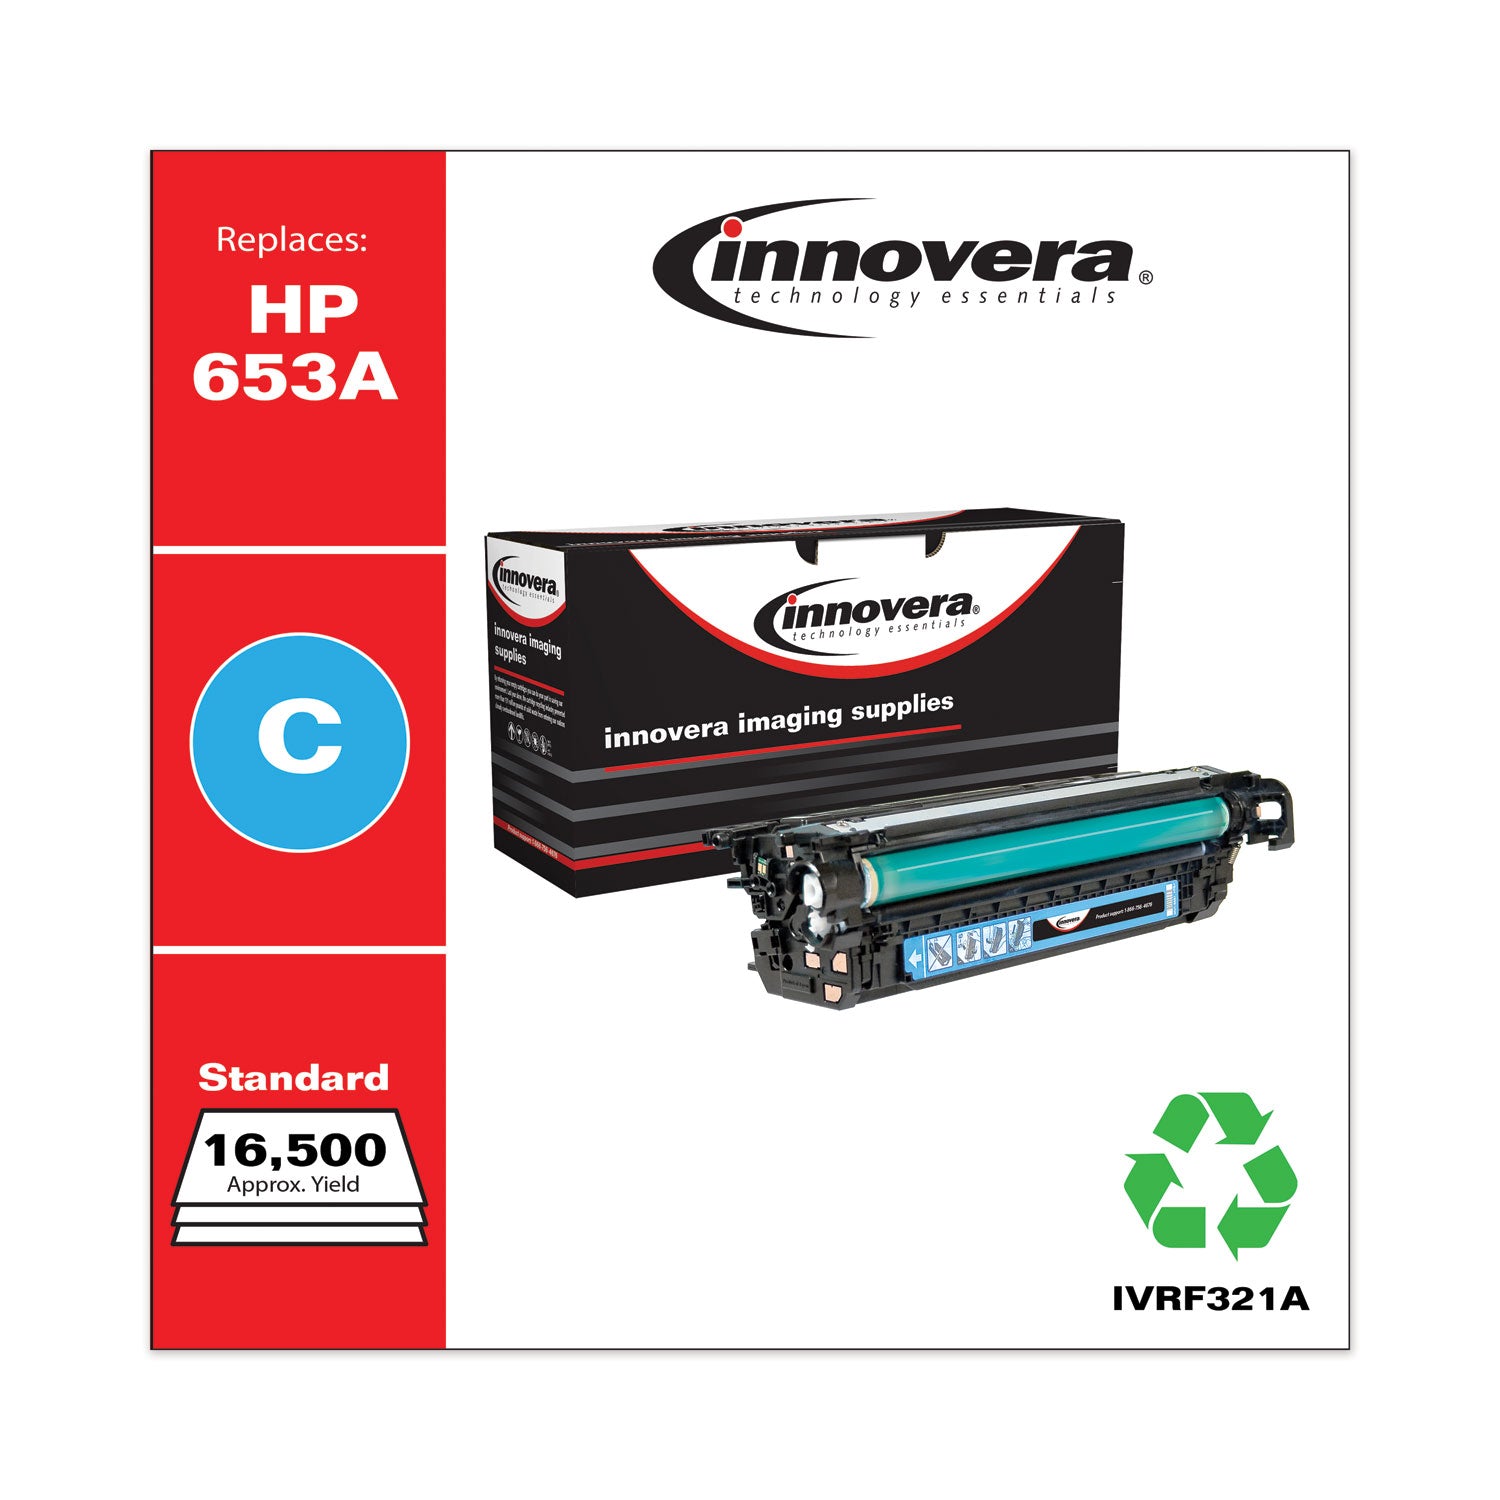 remanufactured-cyan-toner-replacement-for-653a-cf321a-16500-page-yield-ships-in-1-3-business-days_ivrf321a - 2